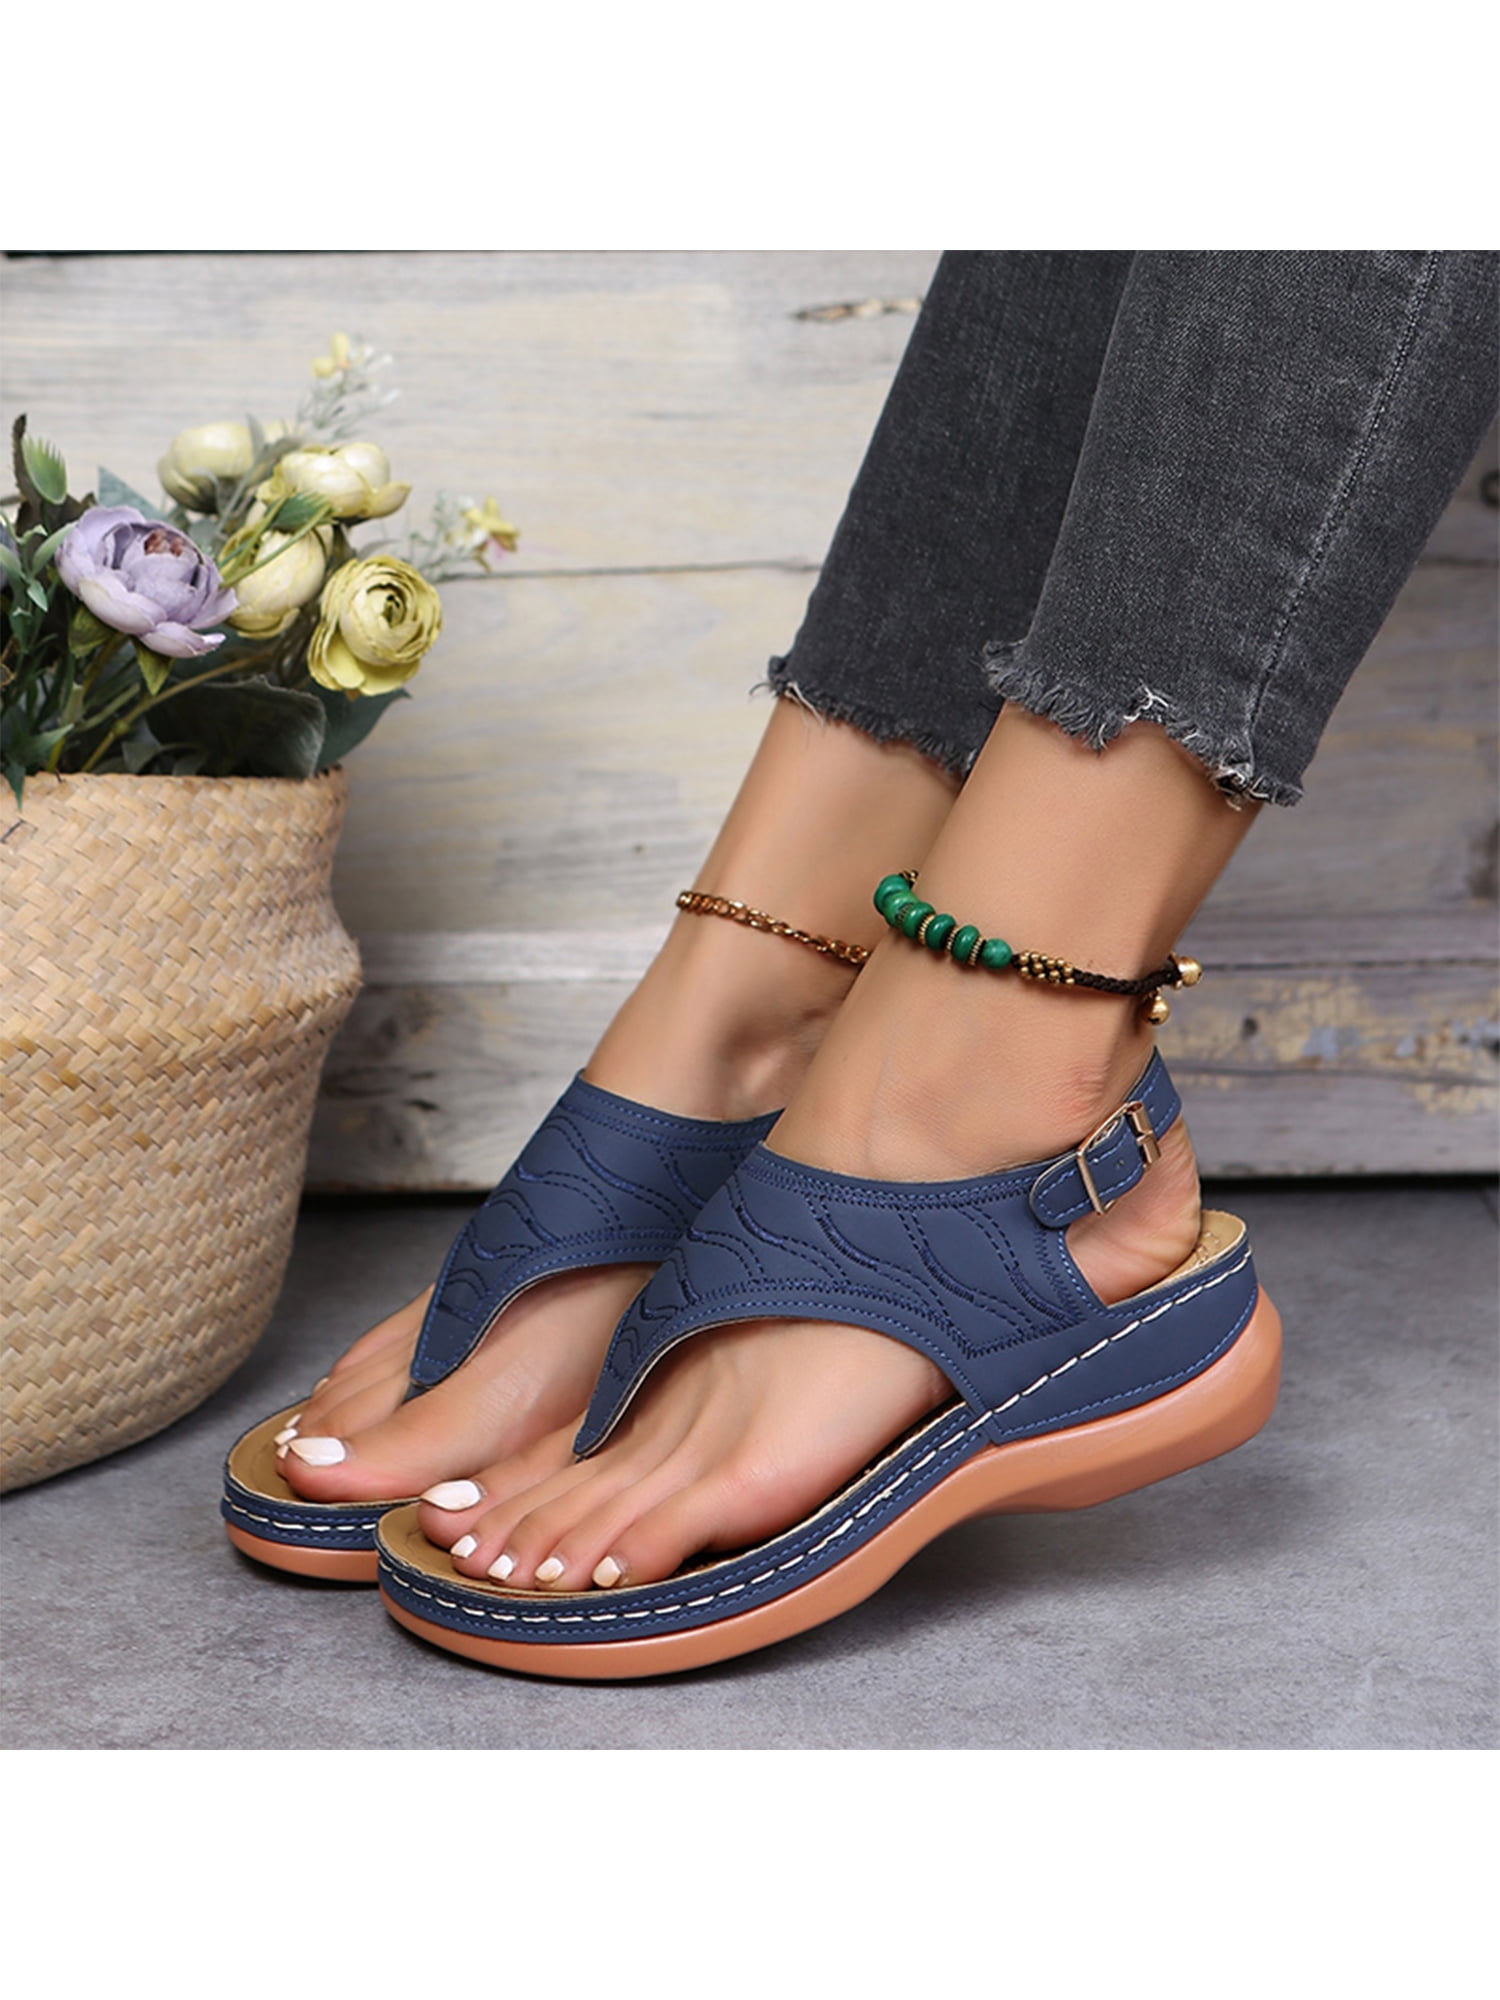 Daeful Flip Flops for Women Comfortable Arch Support Sandals Thong T ...